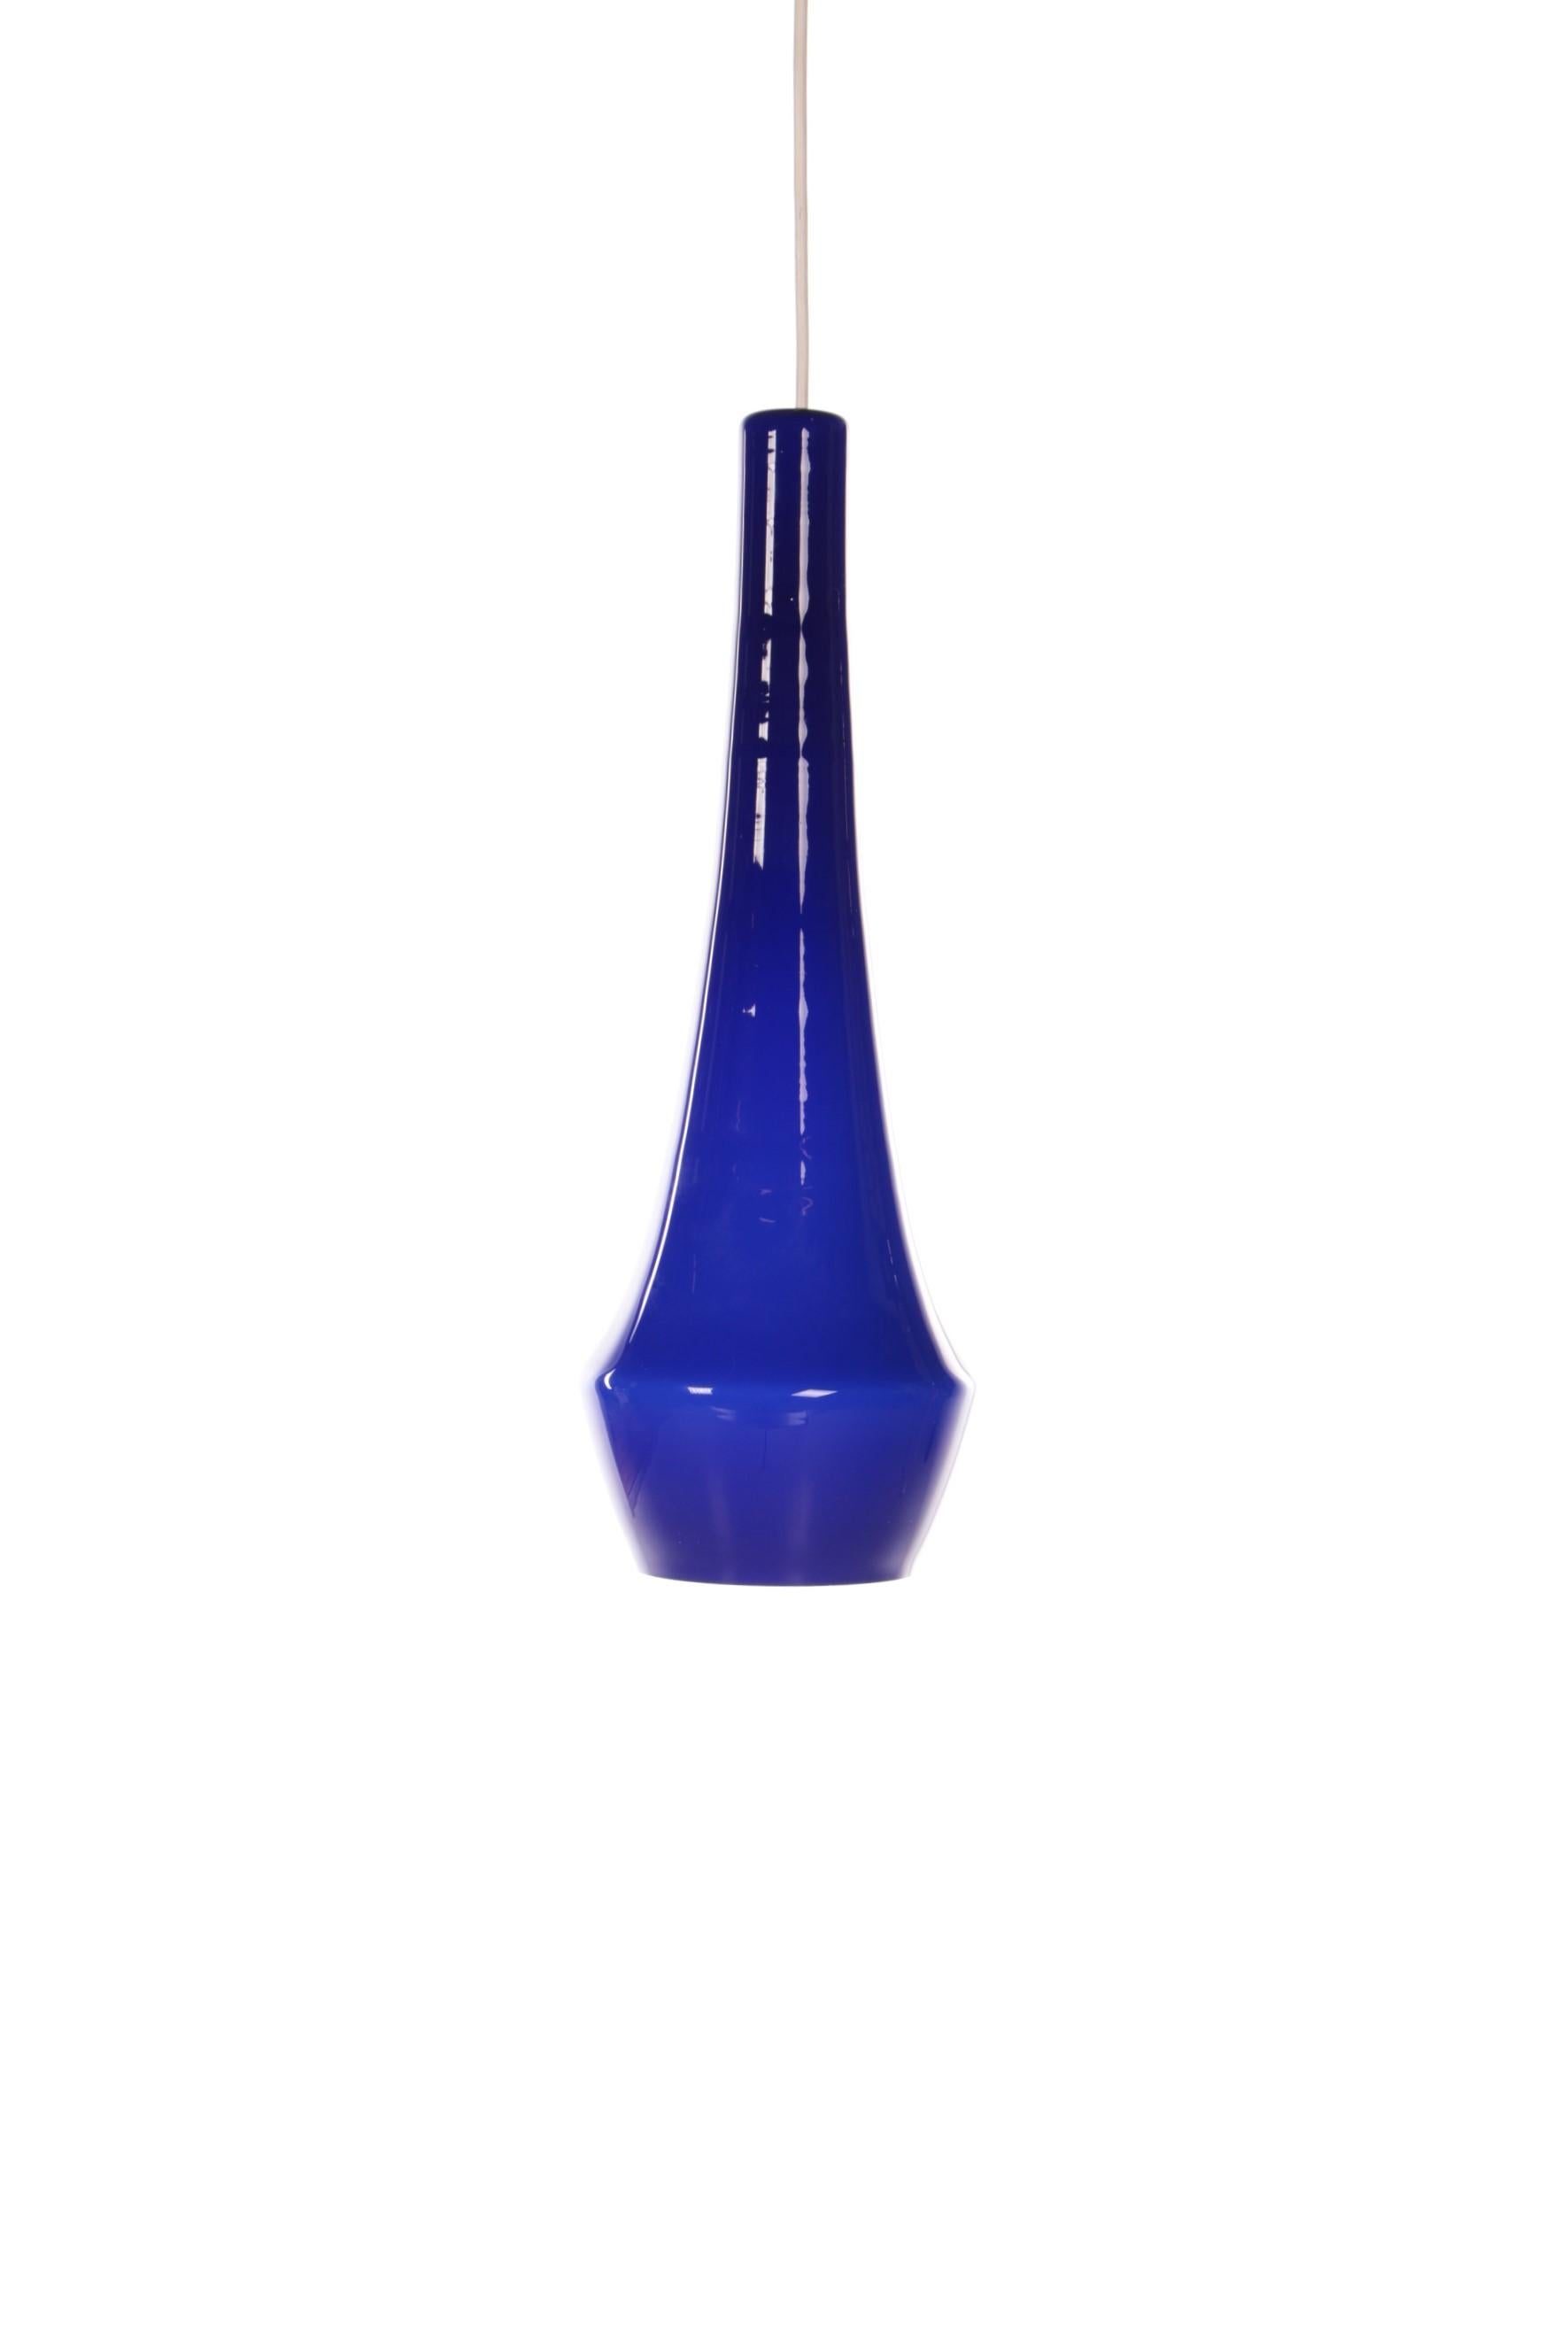 Holmegaard Glass hanging lamp Design Louis Poulsen,1960 Denmark.


This is a beautiful hanging lamp dark blue, there is no chip on the glass, just perfect.

This lamp is designed by Louis Poulsen and made by Holmegaard in the 1960s.

If you are